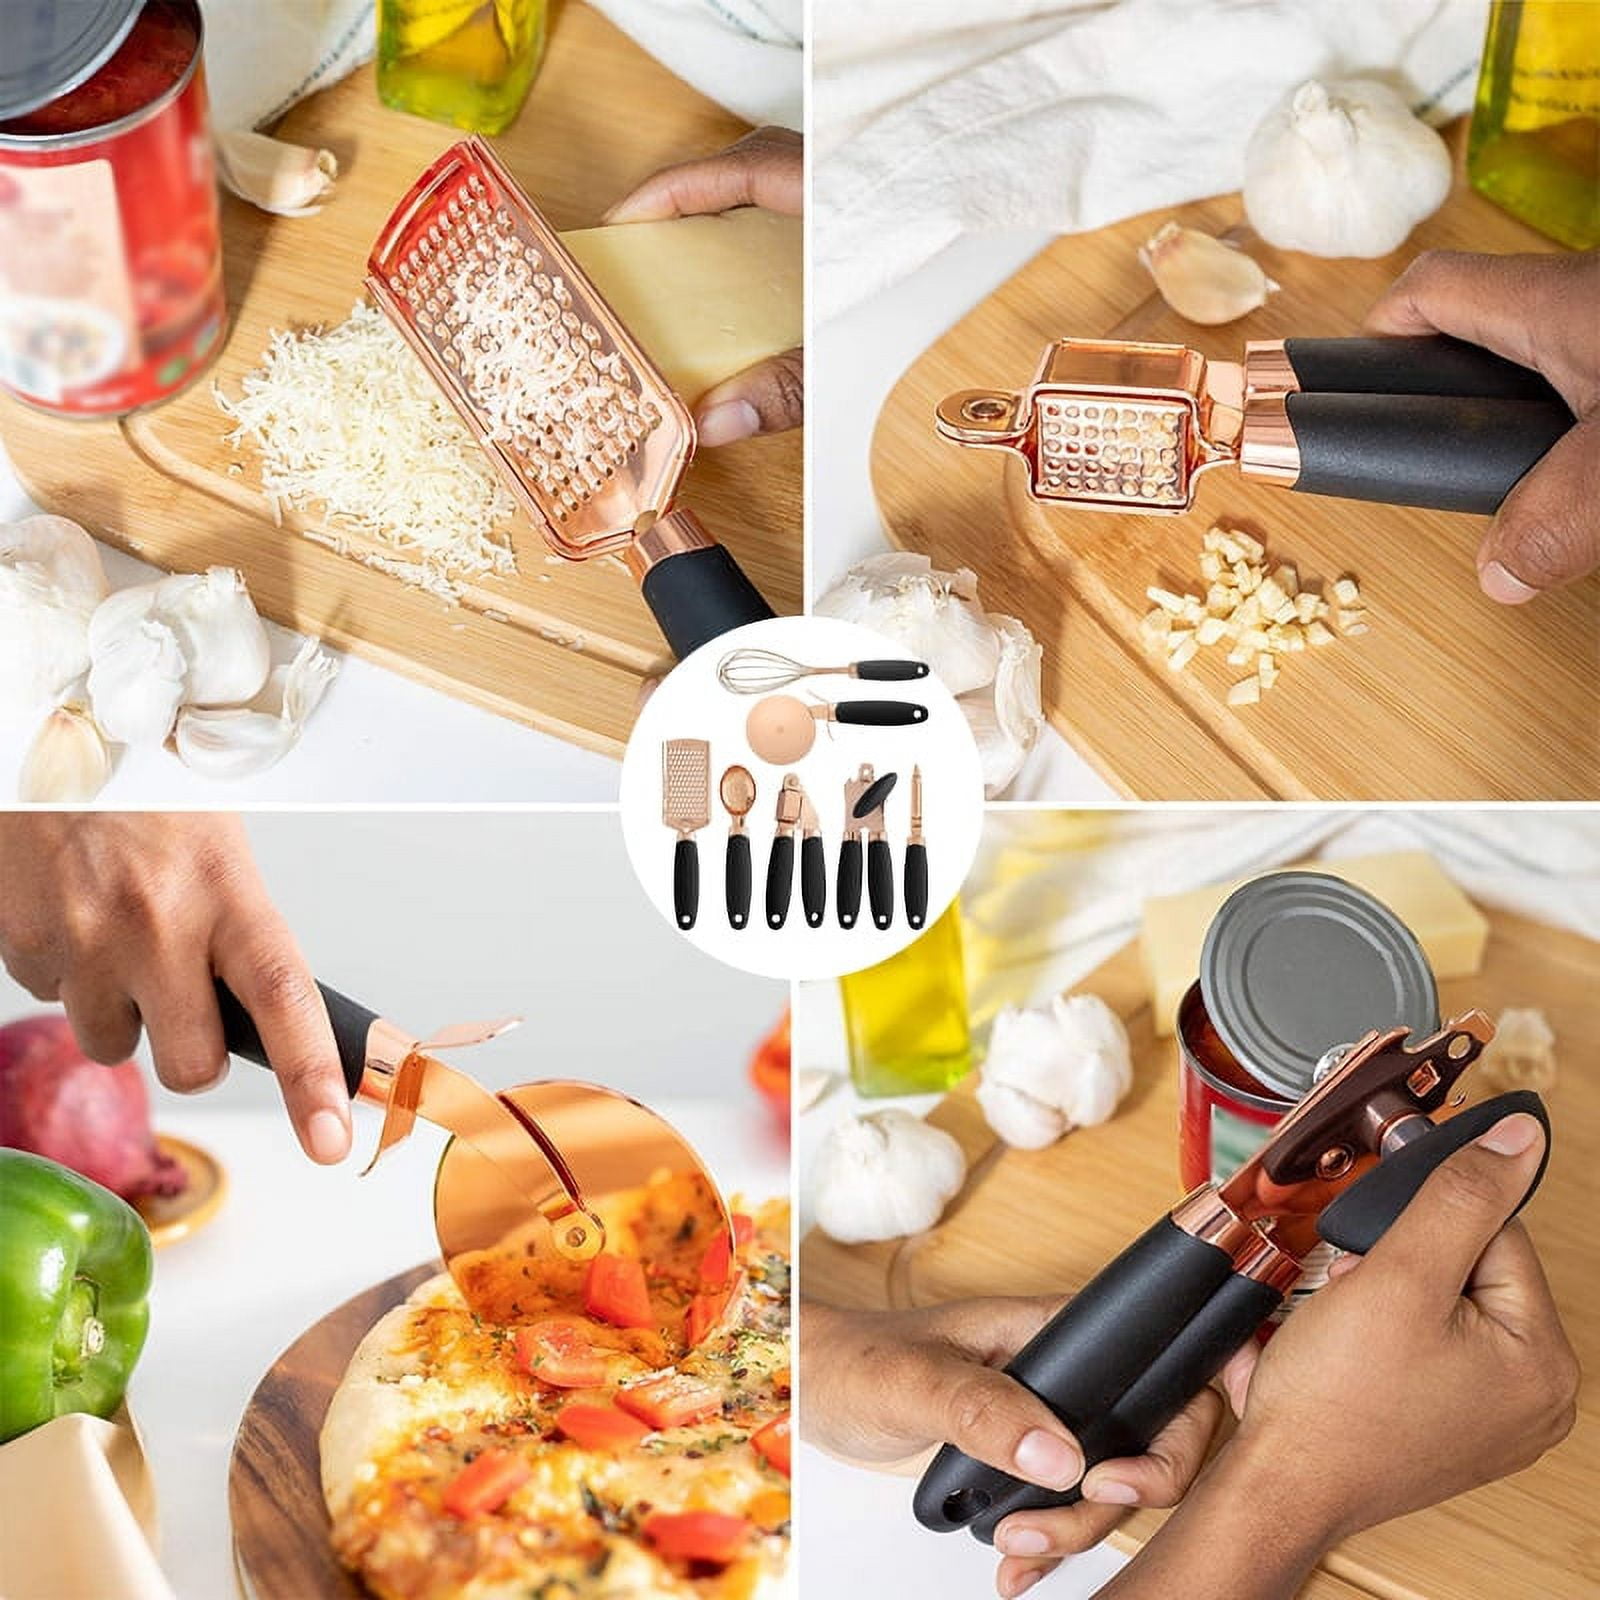 5 Pieces Kitchen Gadgets Set - Space Saving Cooking Tools Accessories Cheese Chocolate Grater, Fruit Vegetable Peeler, Bottle Opener, Pizza Cutter, Bu